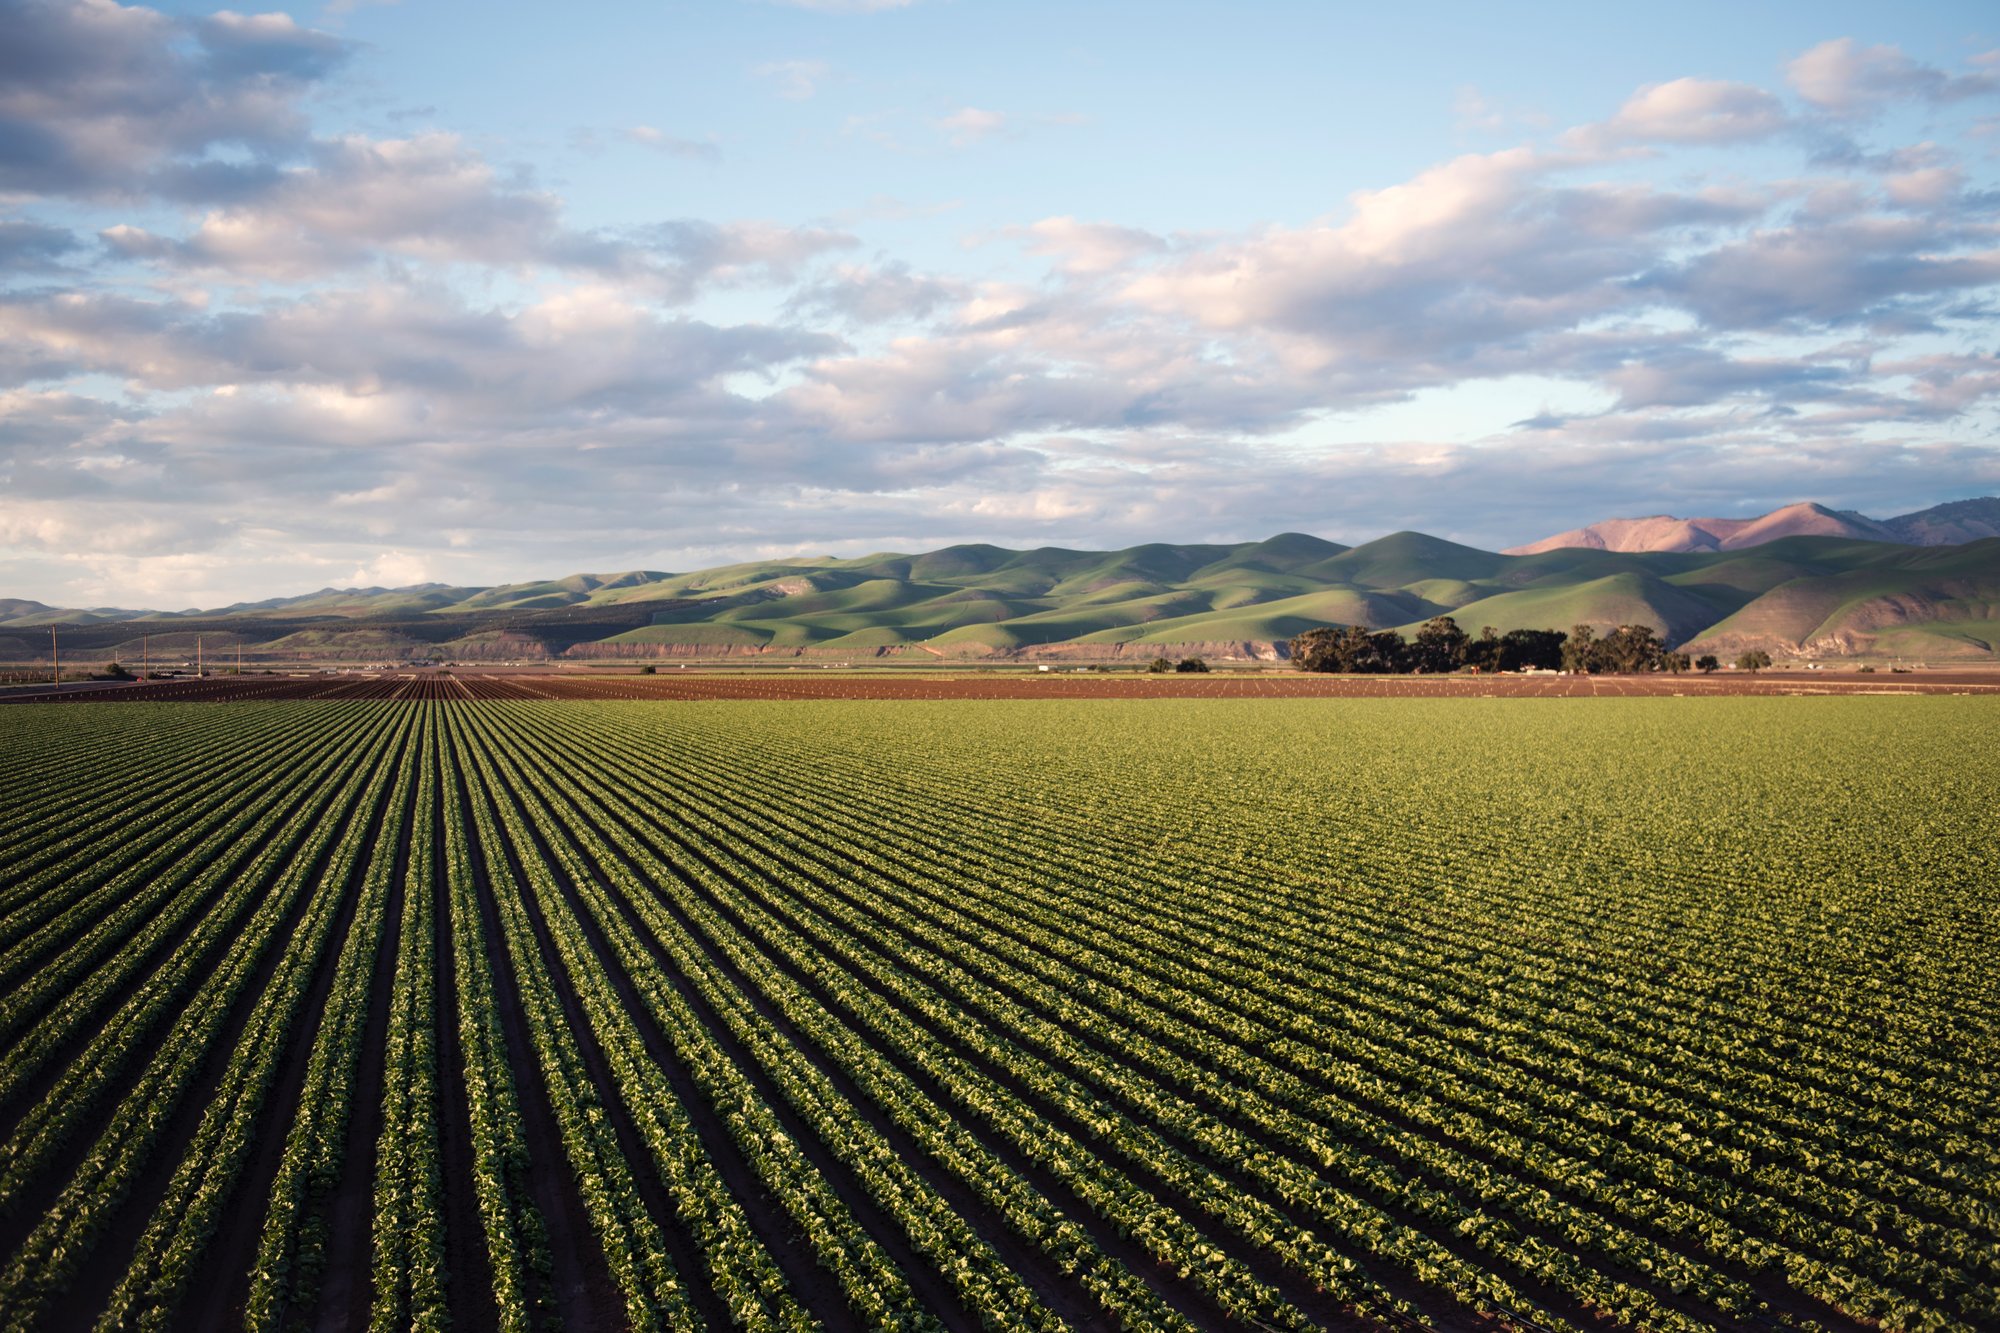 Many straight rows of green crops with mountains in the distance set against a cloudy blue sky